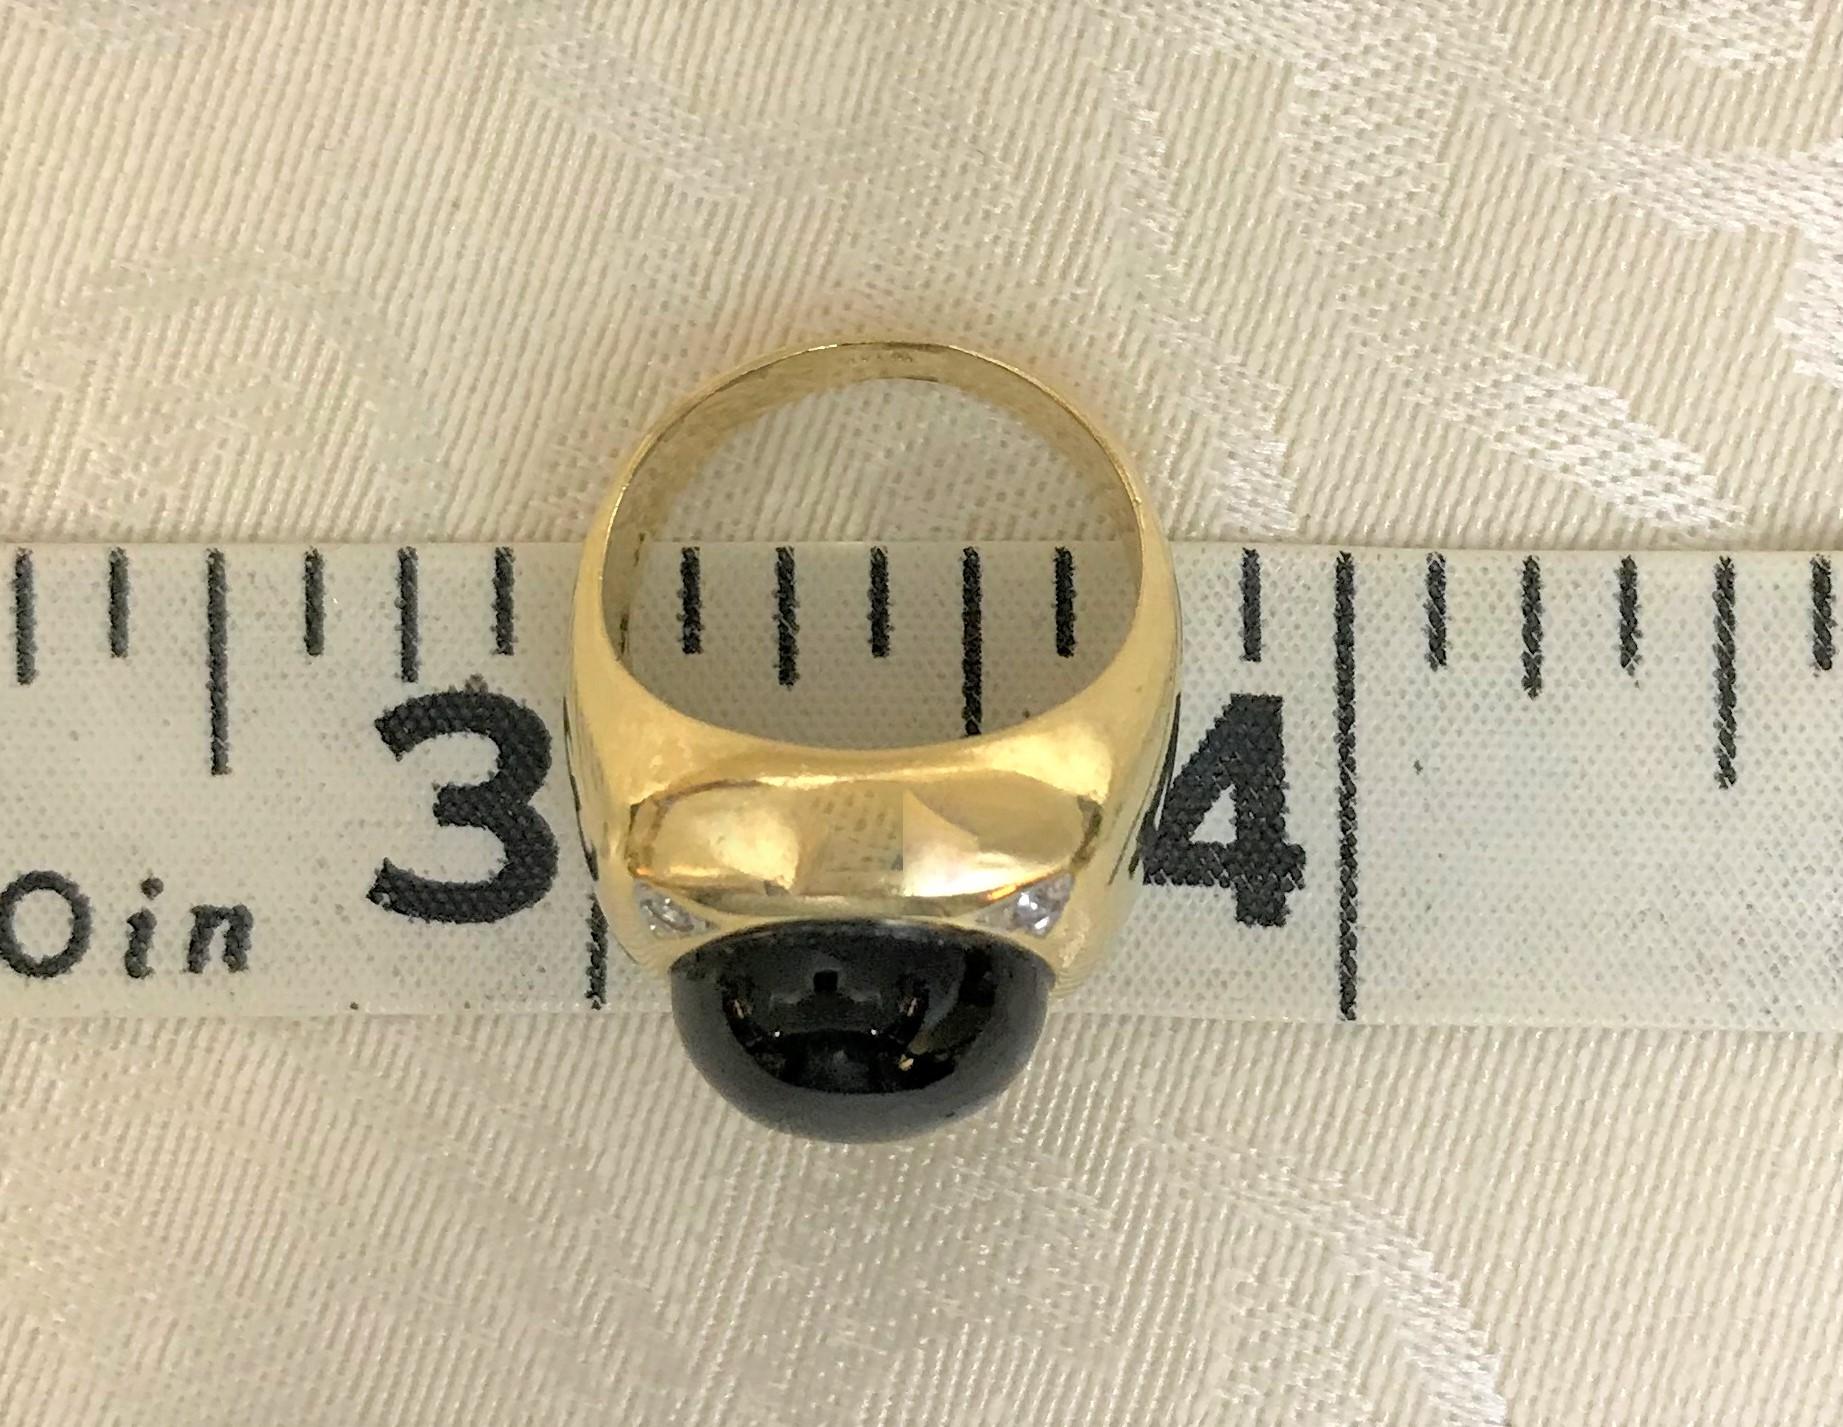 This classic ring will last the test of time and is perfect for man or women!
14 karat yellow gold
Roughly square top of ring, approximately 16.5mm square overall
     Cabochon black onyx stone, approximately 12mm round, set in center of ring
     4